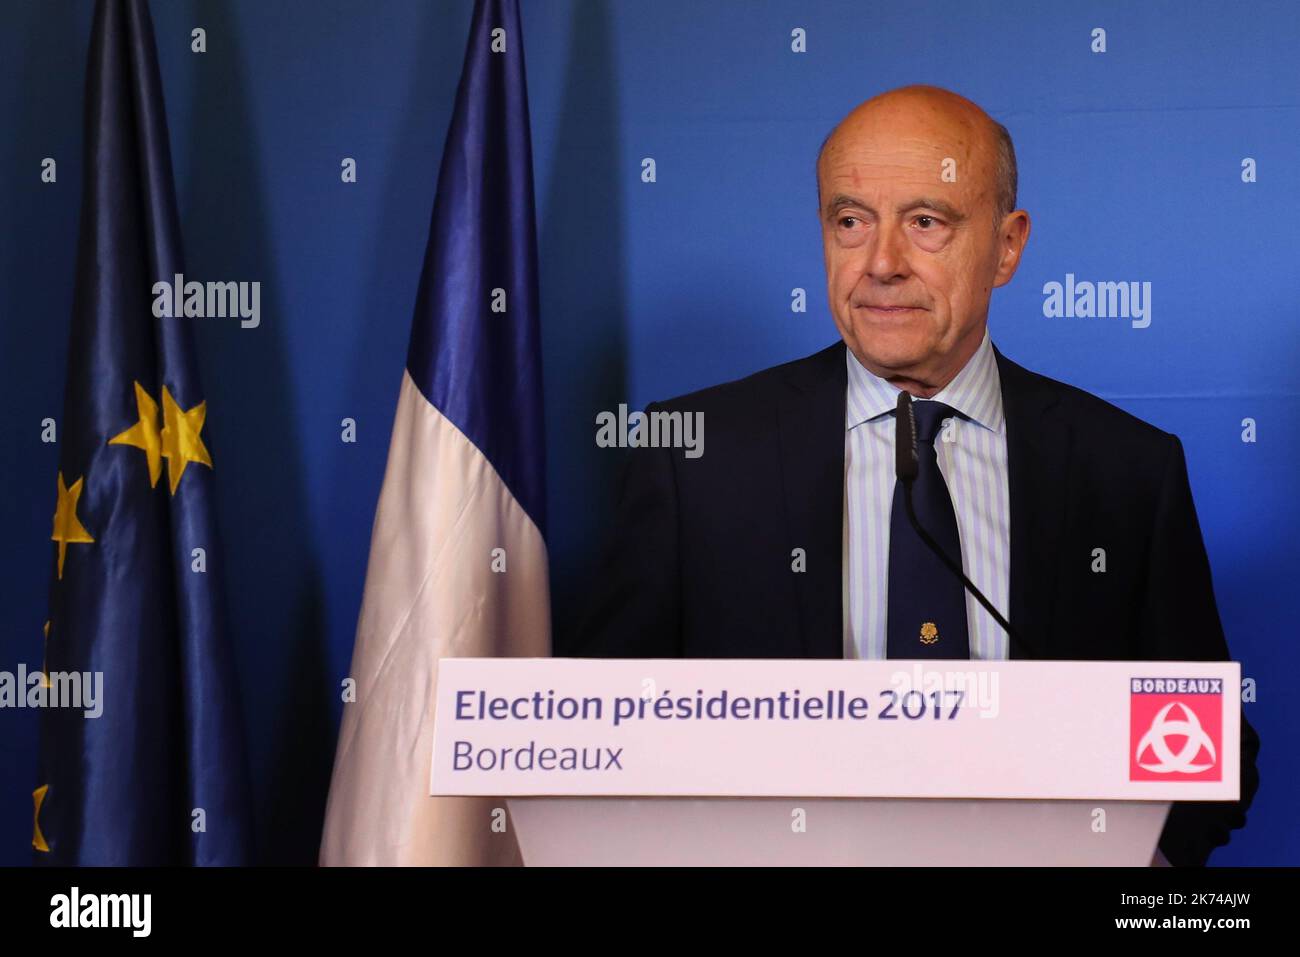 First round of the French presidential elections 2017 Alain Juppé delivers a speech   Stock Photo